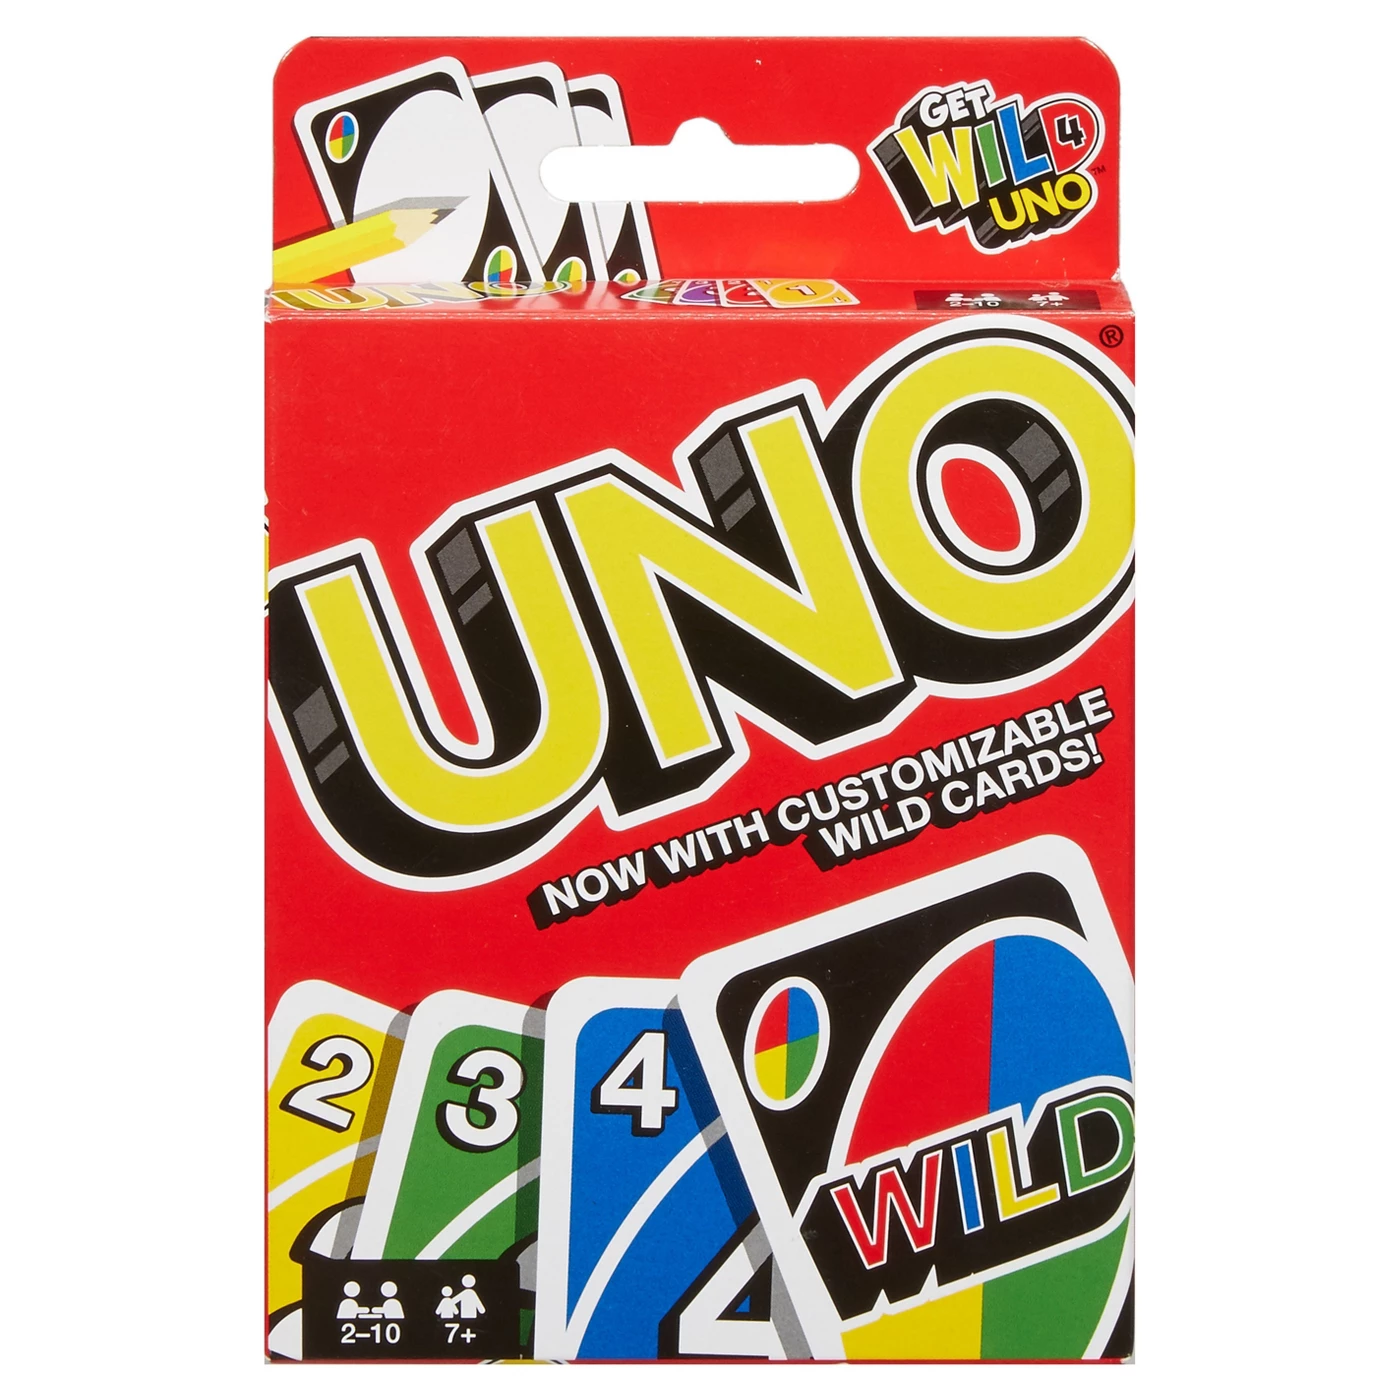 UNO Card Game - image 1 of 7